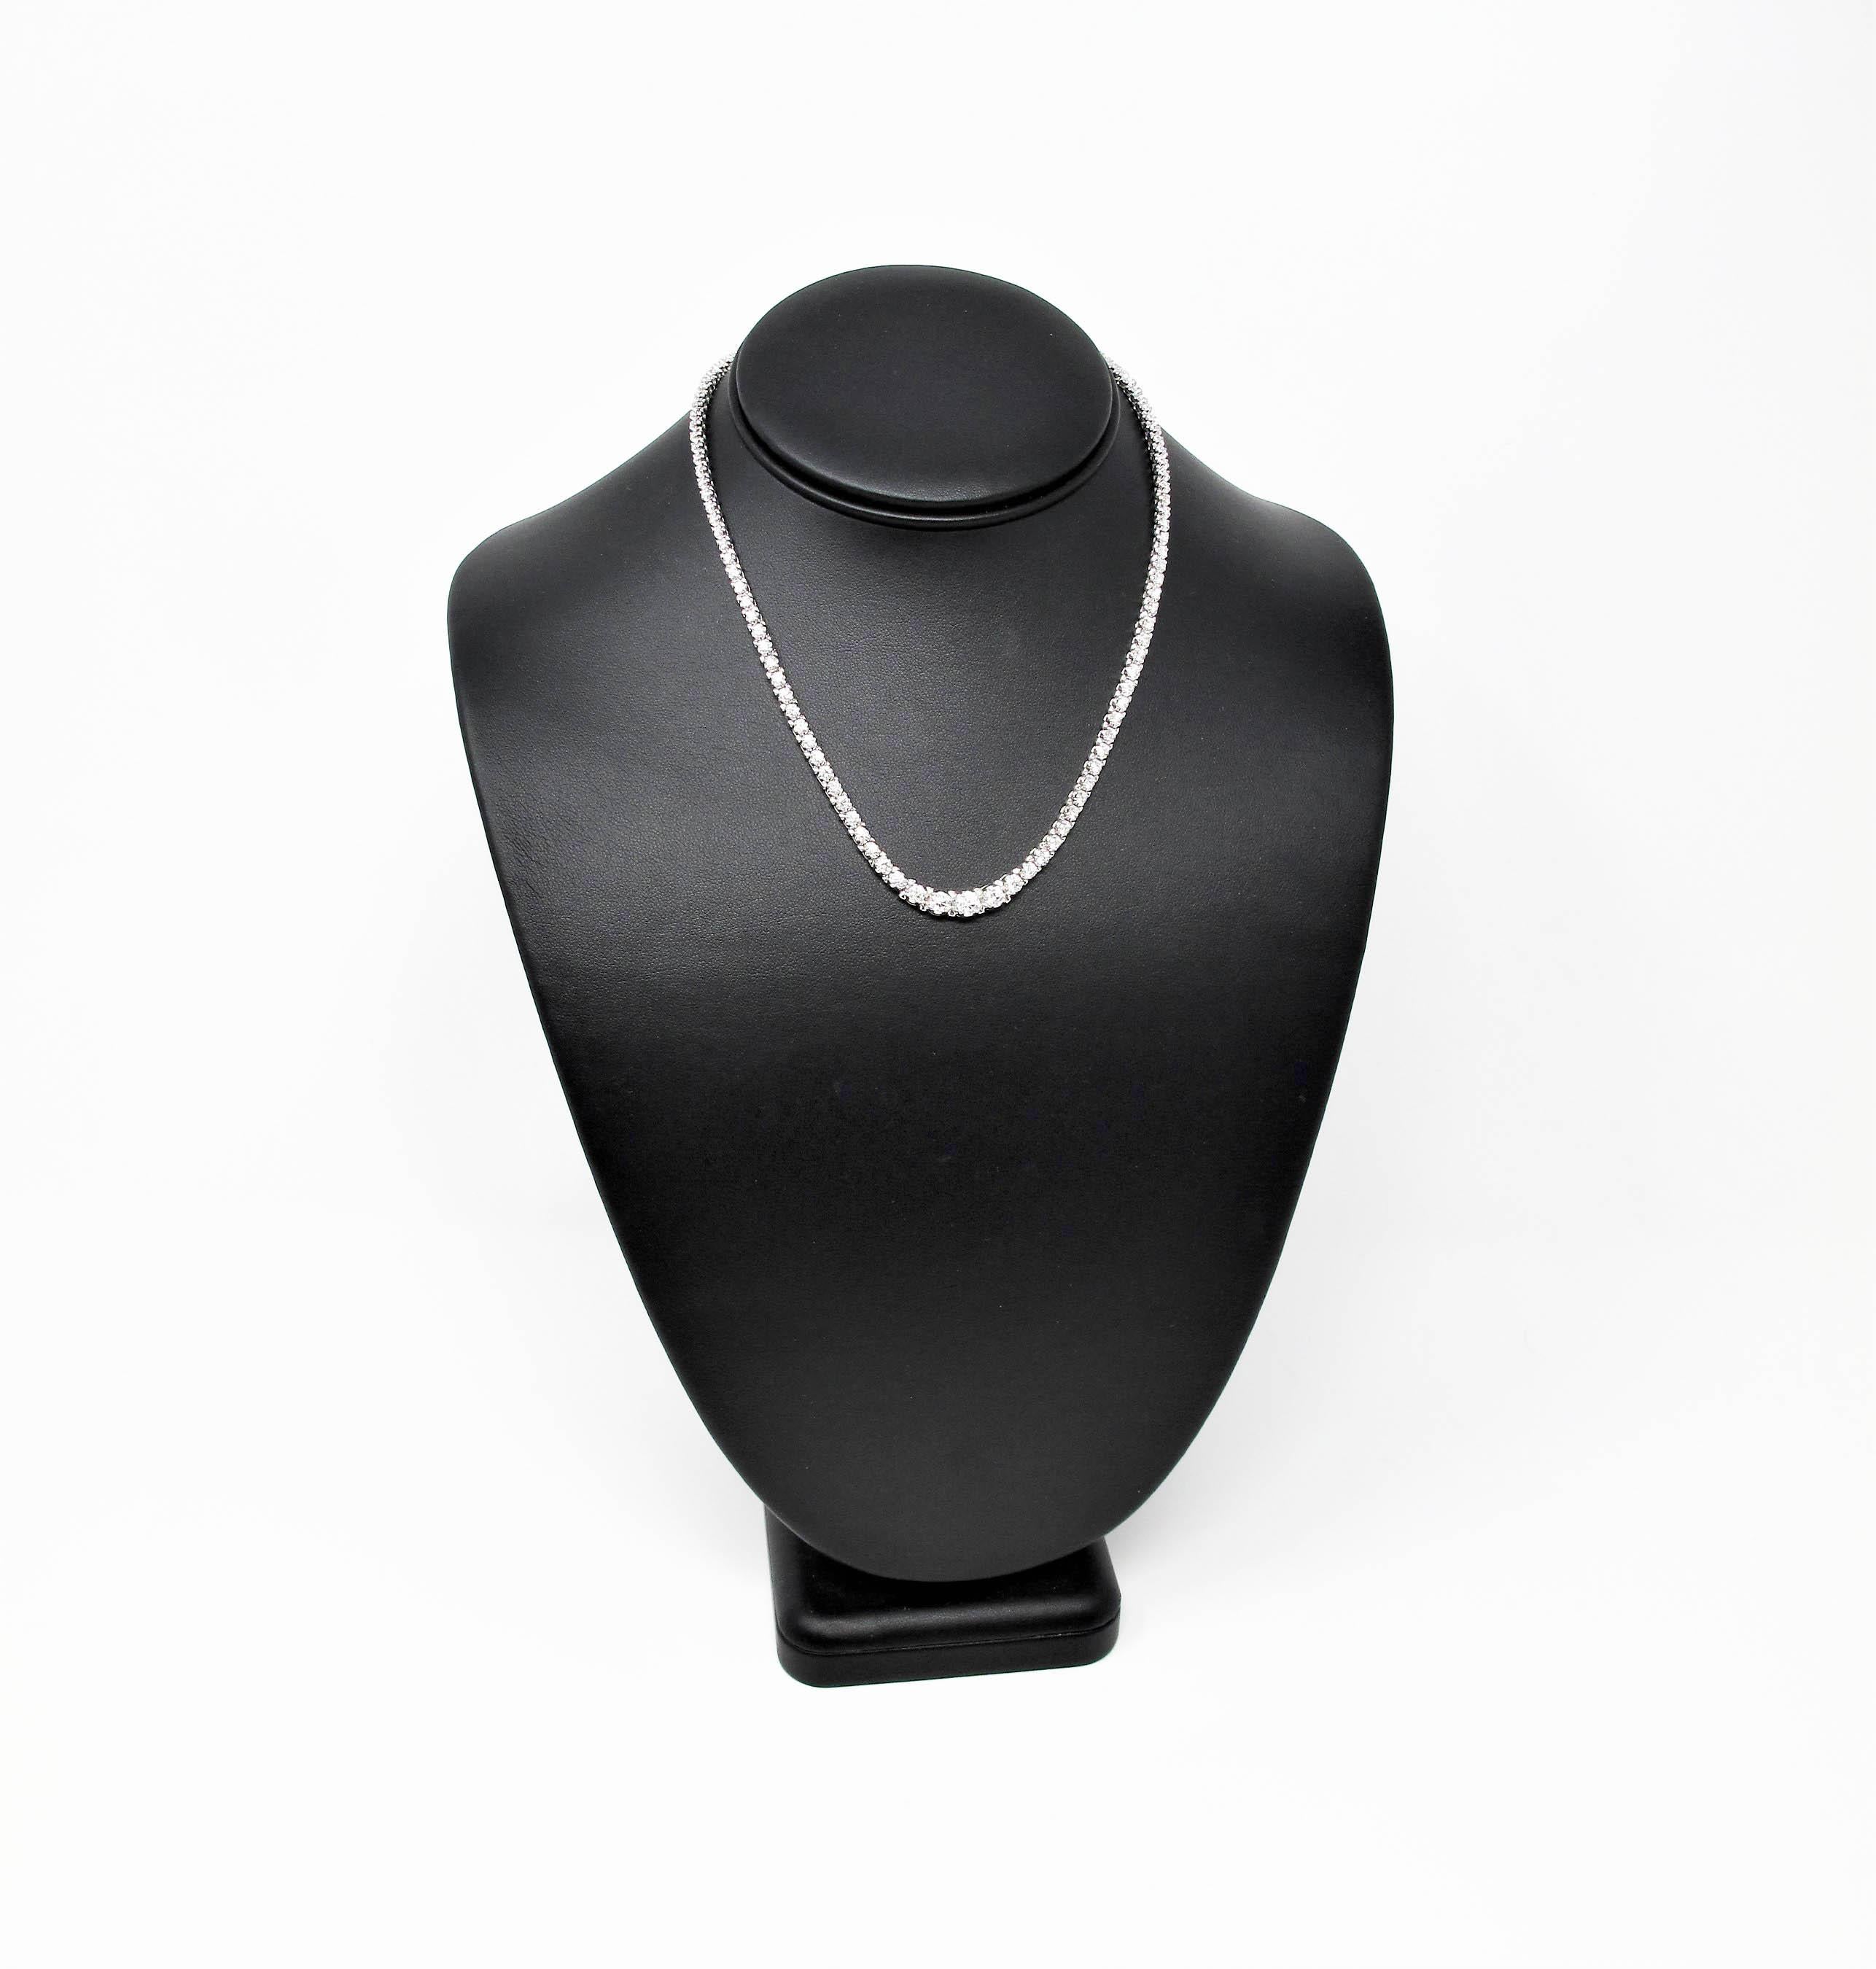 This elegant, graduated diamond necklace will be your go-to necklace for all occasions. Its  timeless style and simple clean lines will elevate any look that it's paired with. It offers incredible sparkle without being over the top. Pair it with